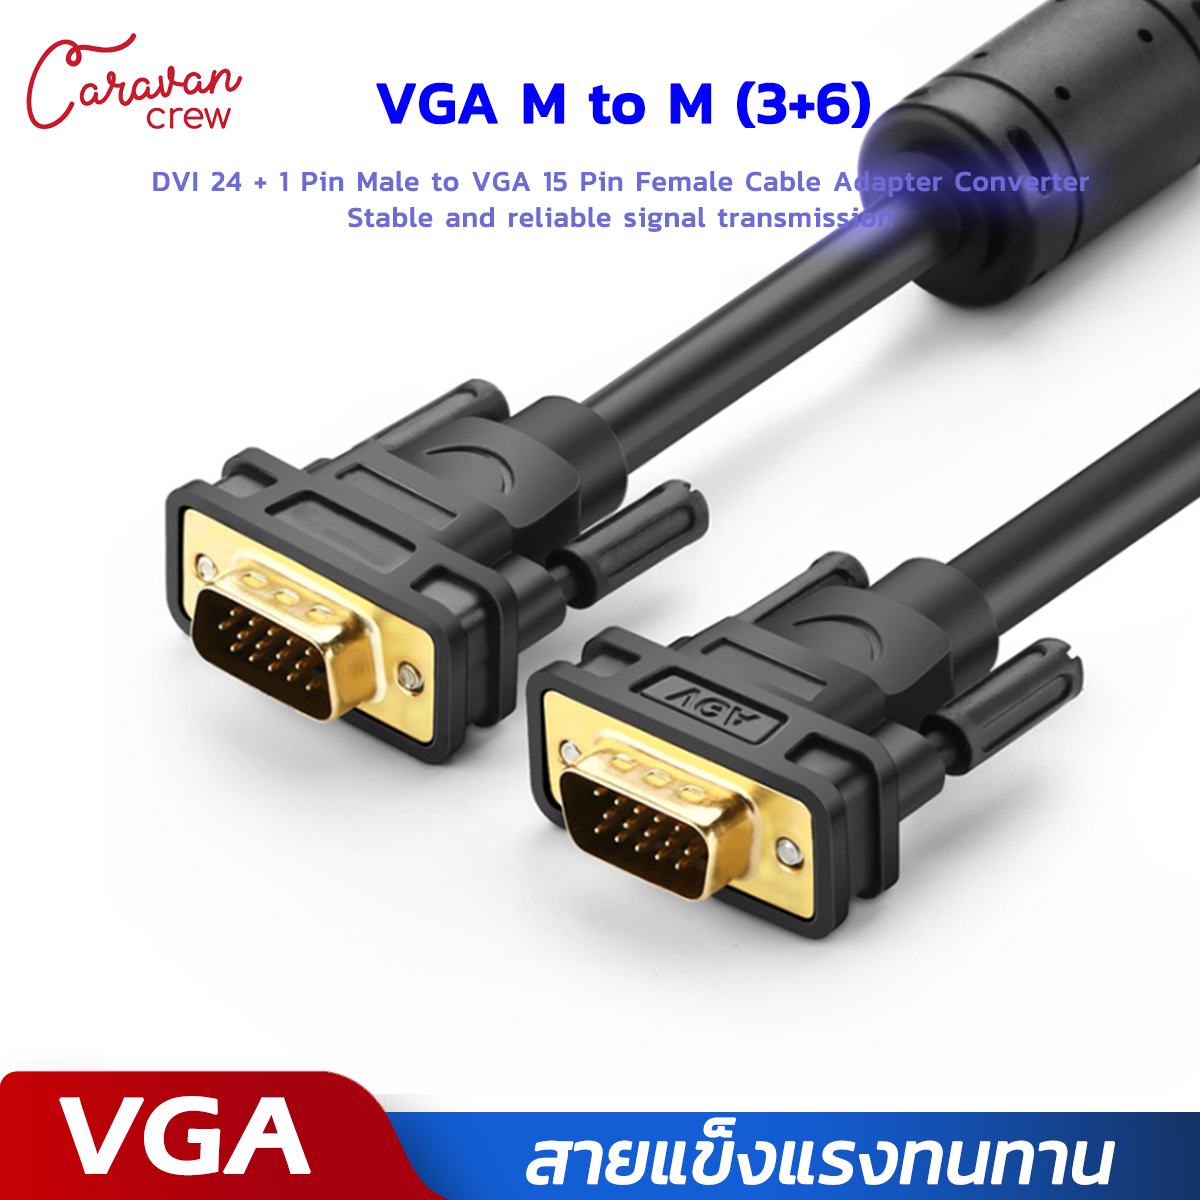 Caravan Crew VGA Male to Male (3+6) Cable M/M 1M 3M 5M for HDTV PC Laptop Box Projector Monitor VGA Cable